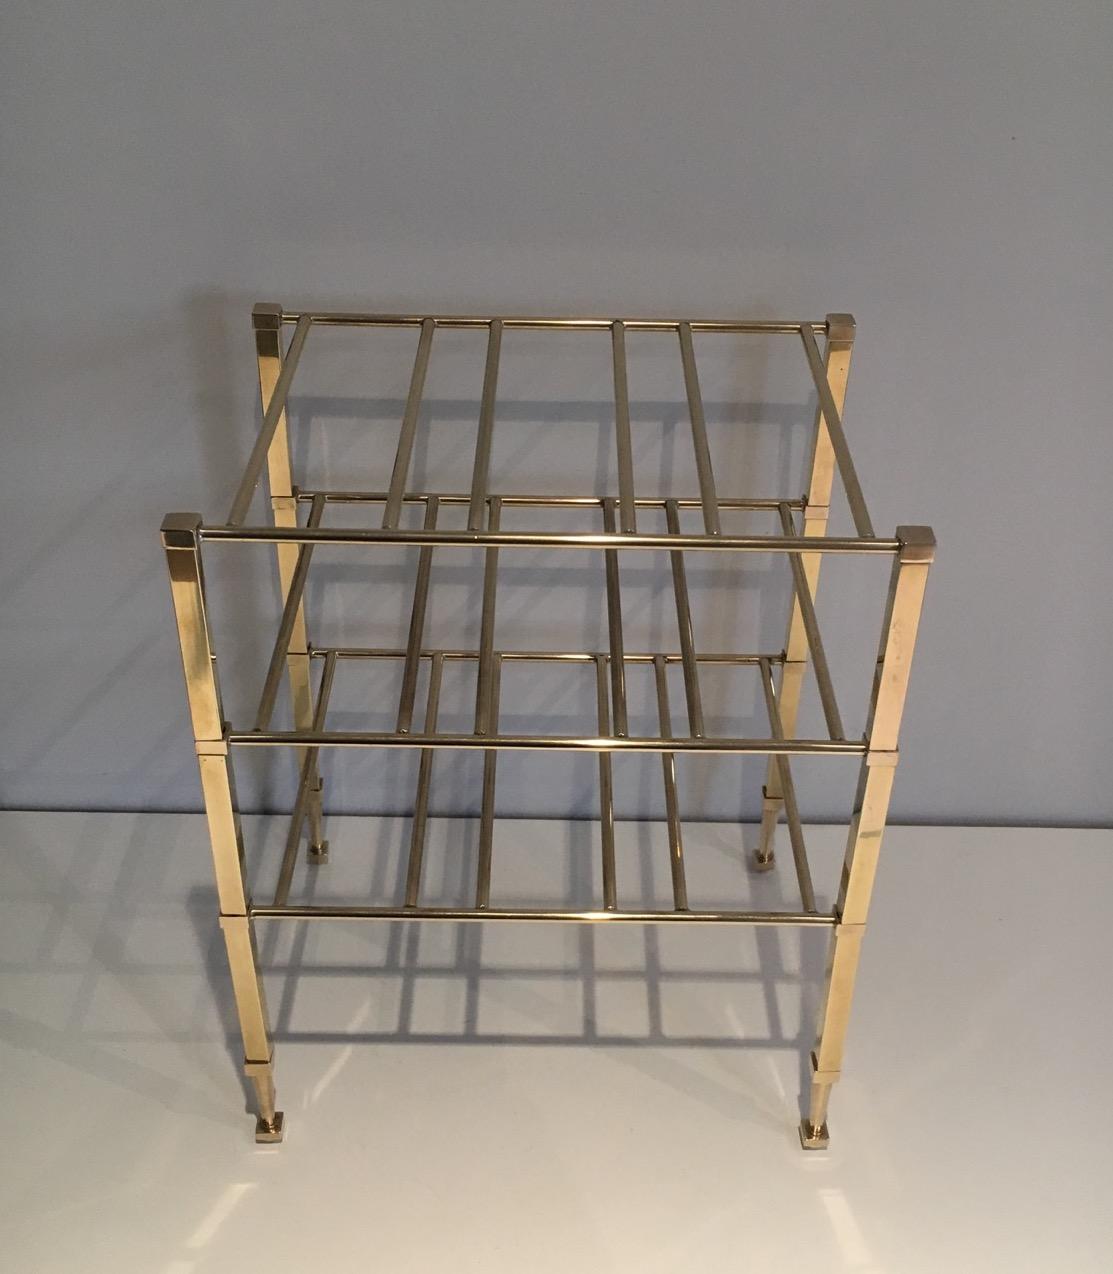 Attributed to Maison Jansen, Brass Wine Bottles Rack, French, circa 1940 In Good Condition For Sale In Marcq-en-Barœul, Hauts-de-France